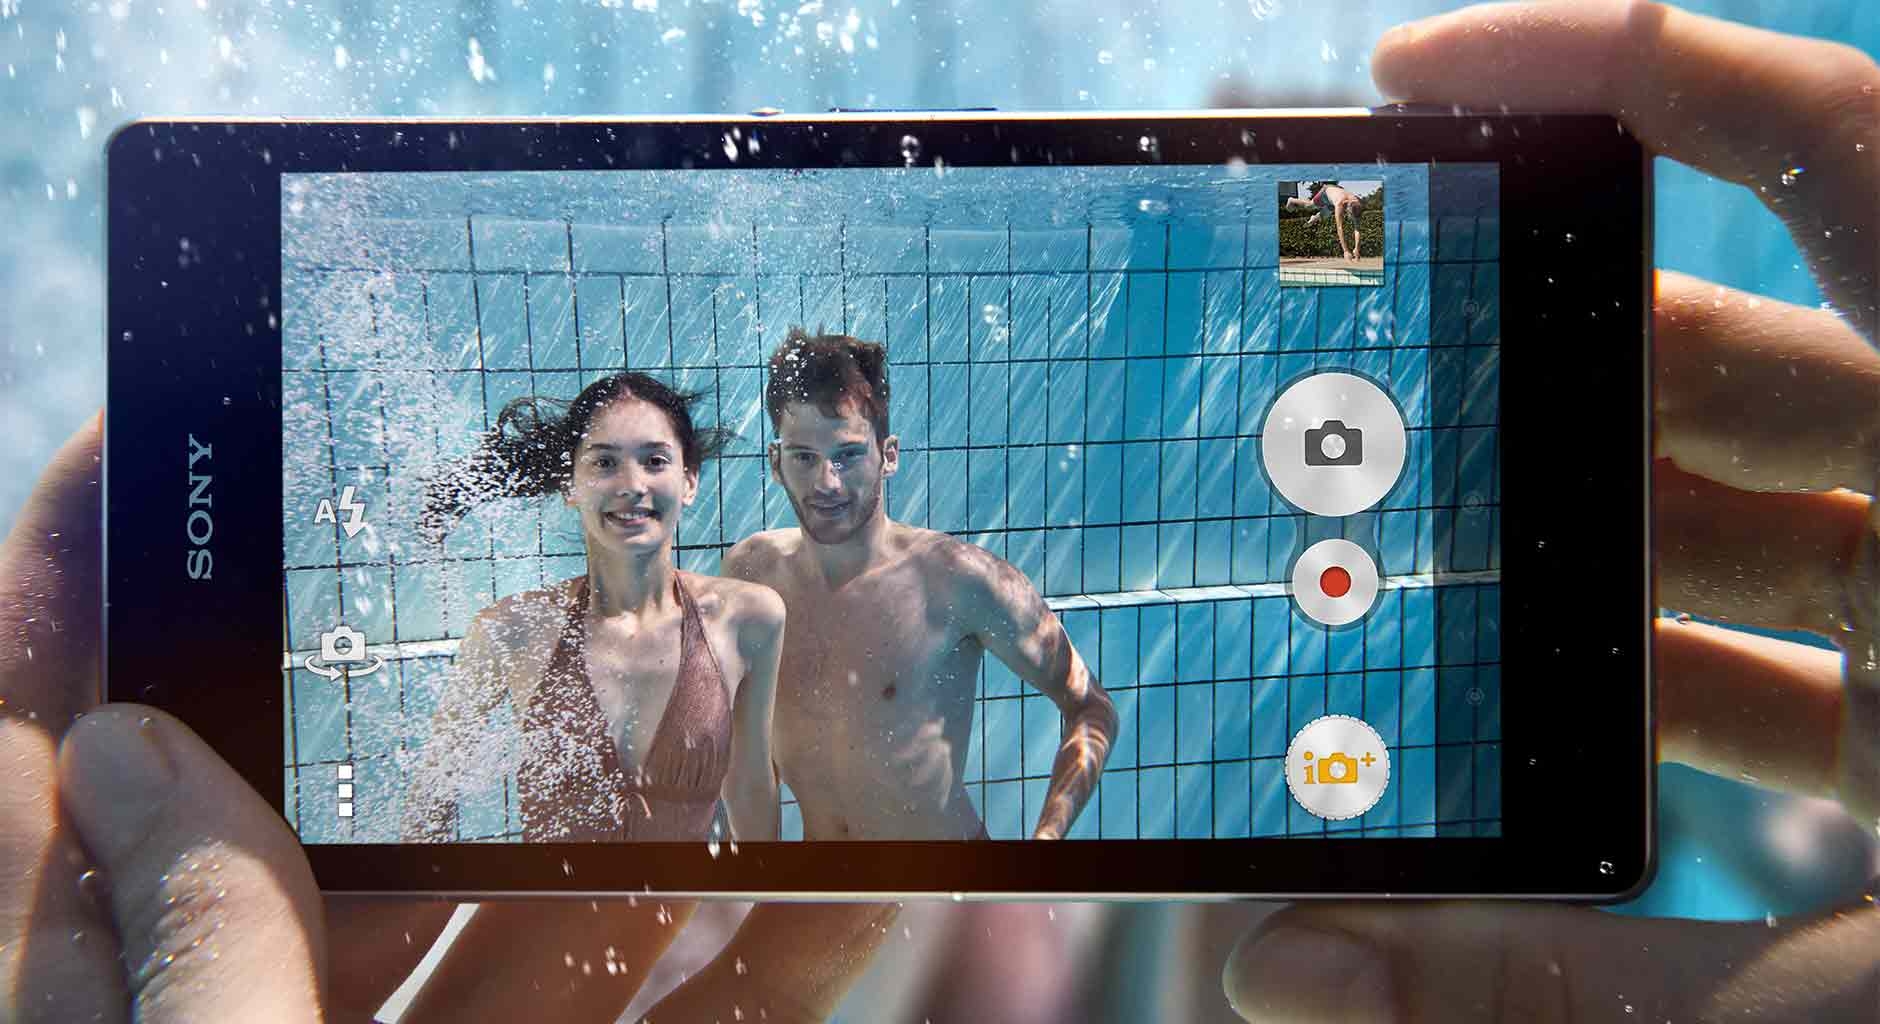 Snap pictures underwater with the waterproof Xperia Z1 Android smartphone.